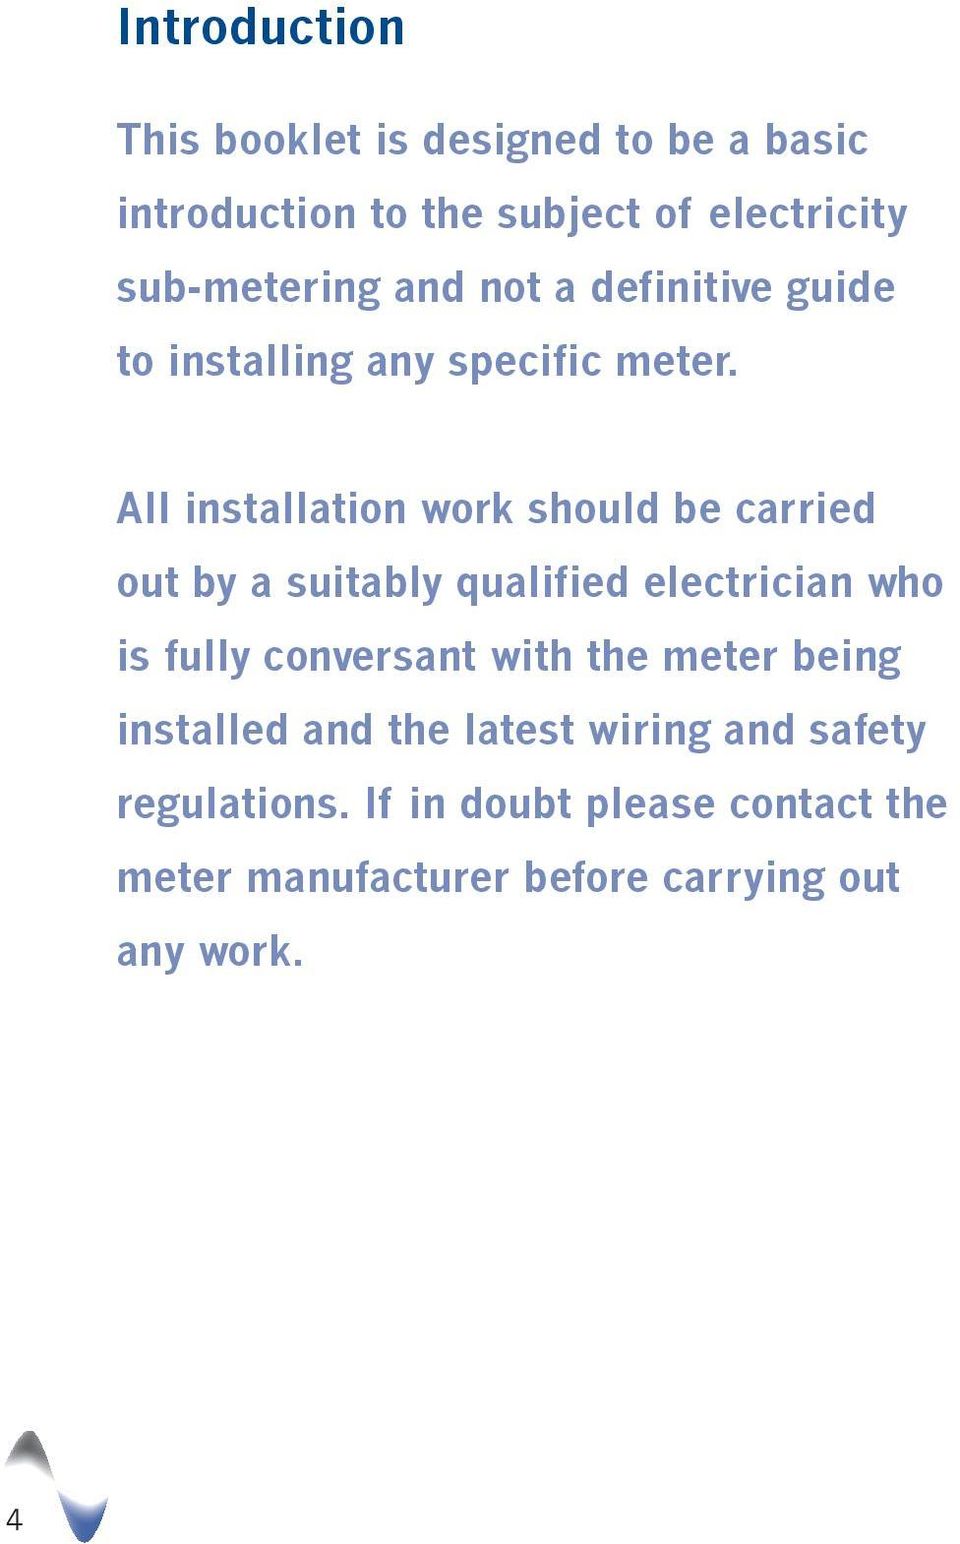 All installation work should be carried out by a suitably qualified electrician who is fully conversant